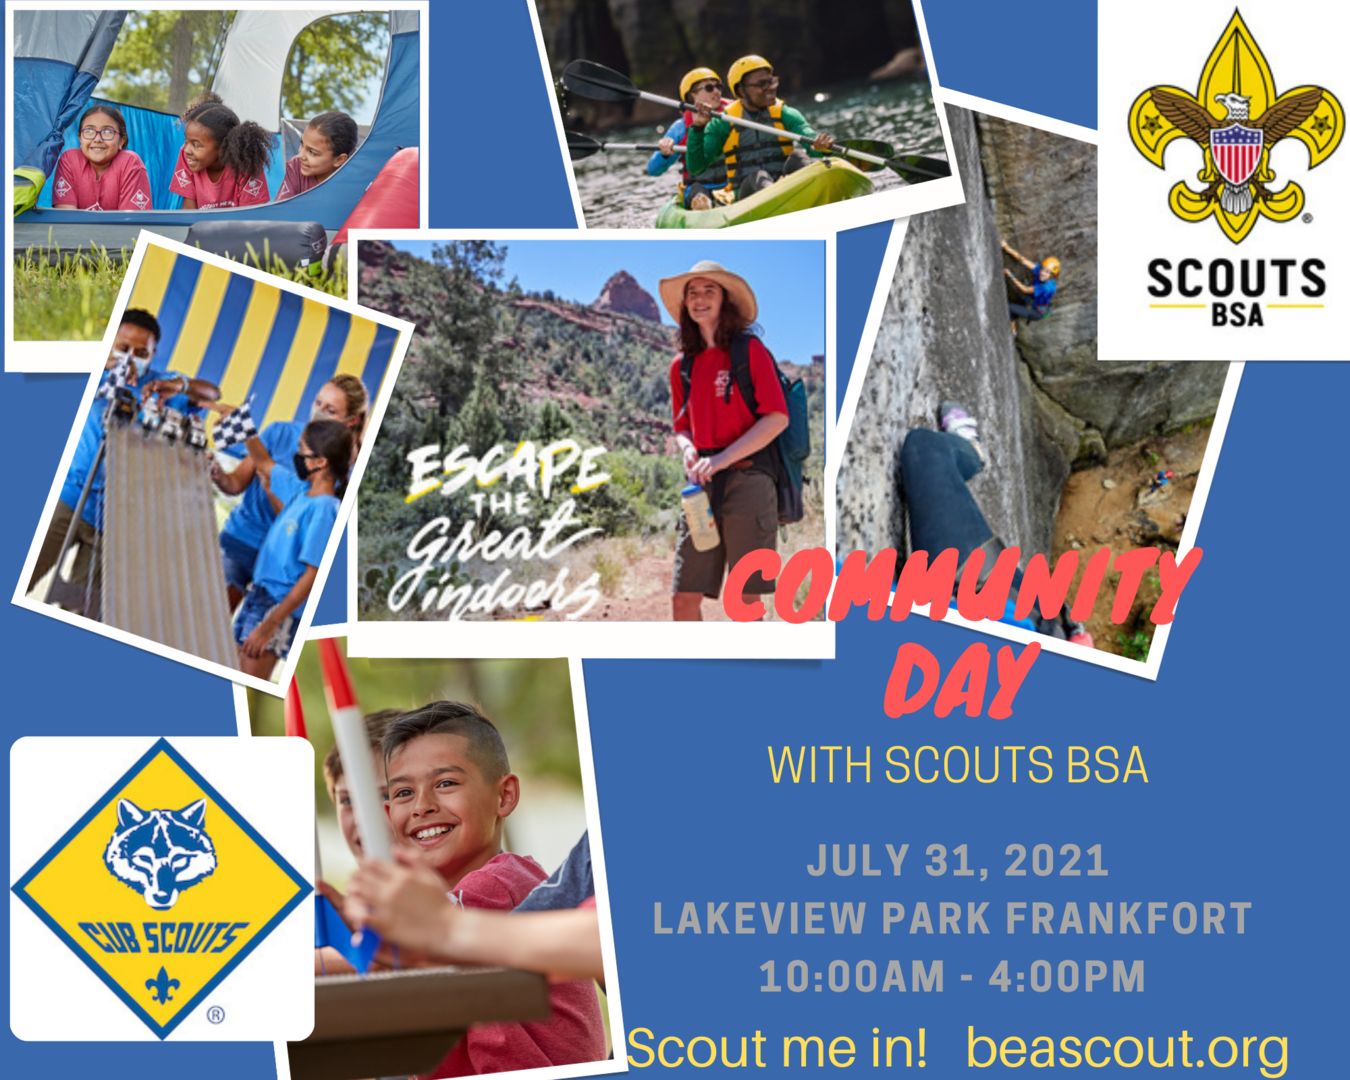 Community Day with Scouts BSA. Come see what Scouts BSA has to offer youth. Sat, July 31 10am-4pm, Frankfort, Kentucky, United States